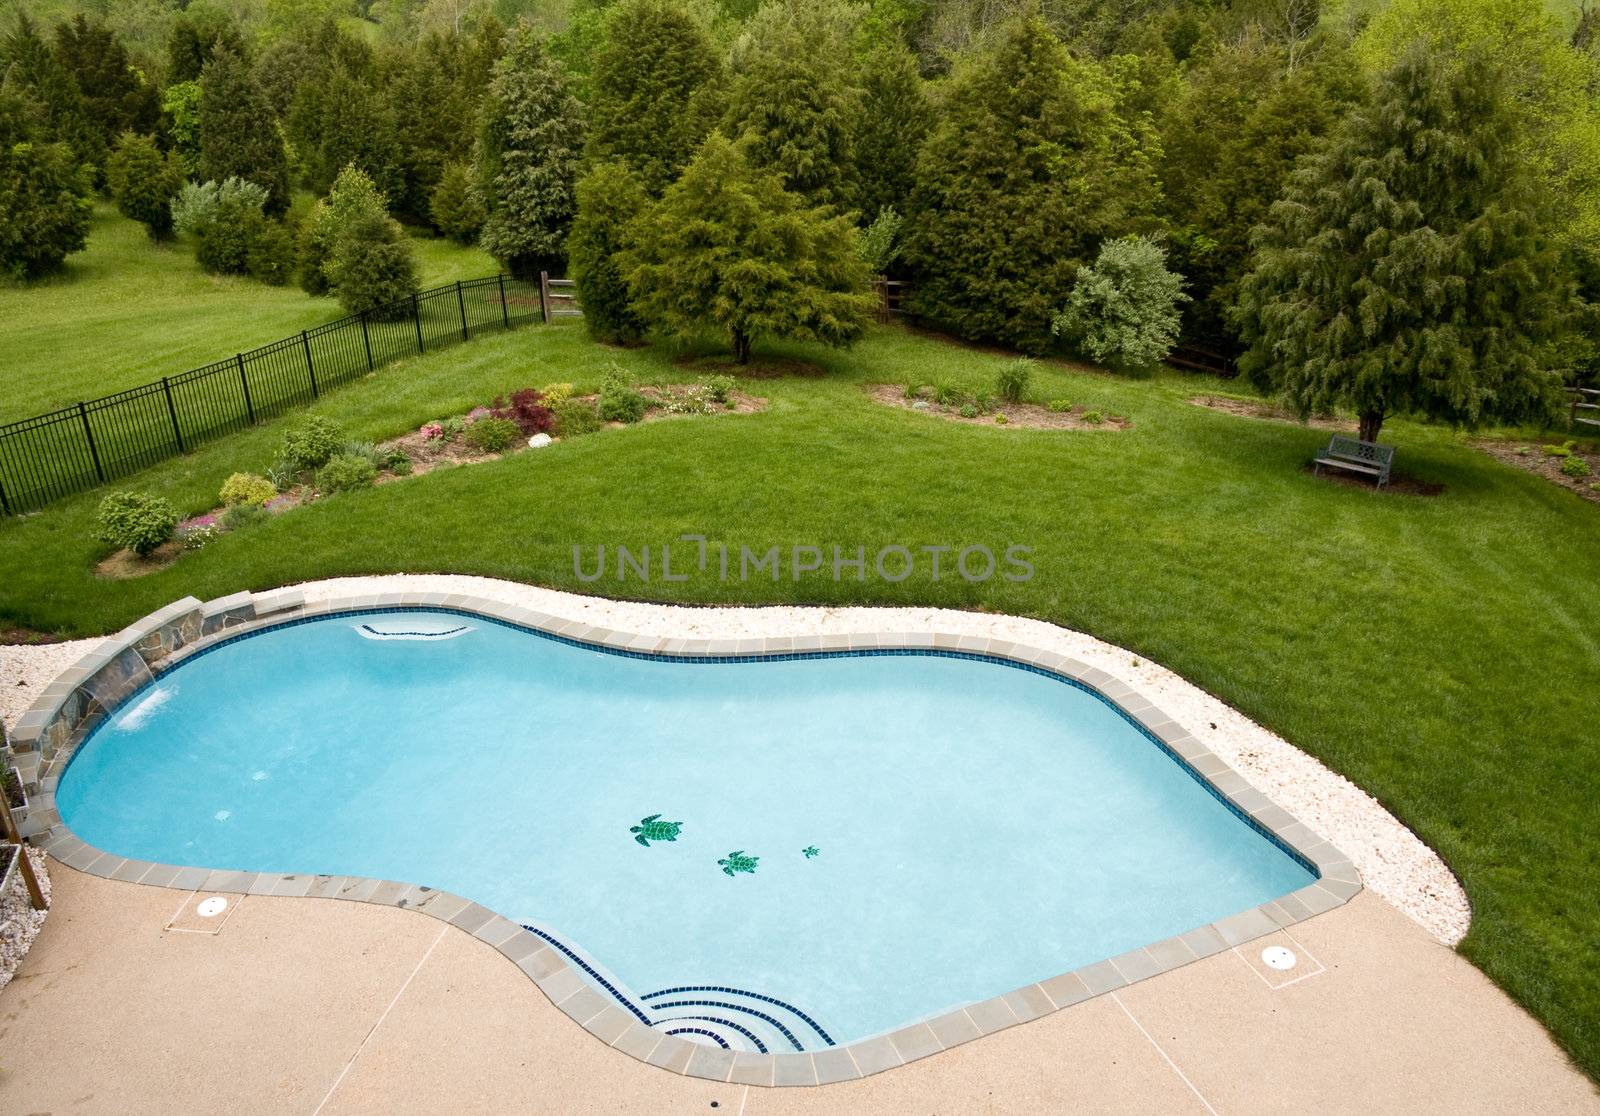 View of luxury pool and deck with surrounding landscaped garden with flowers and trees